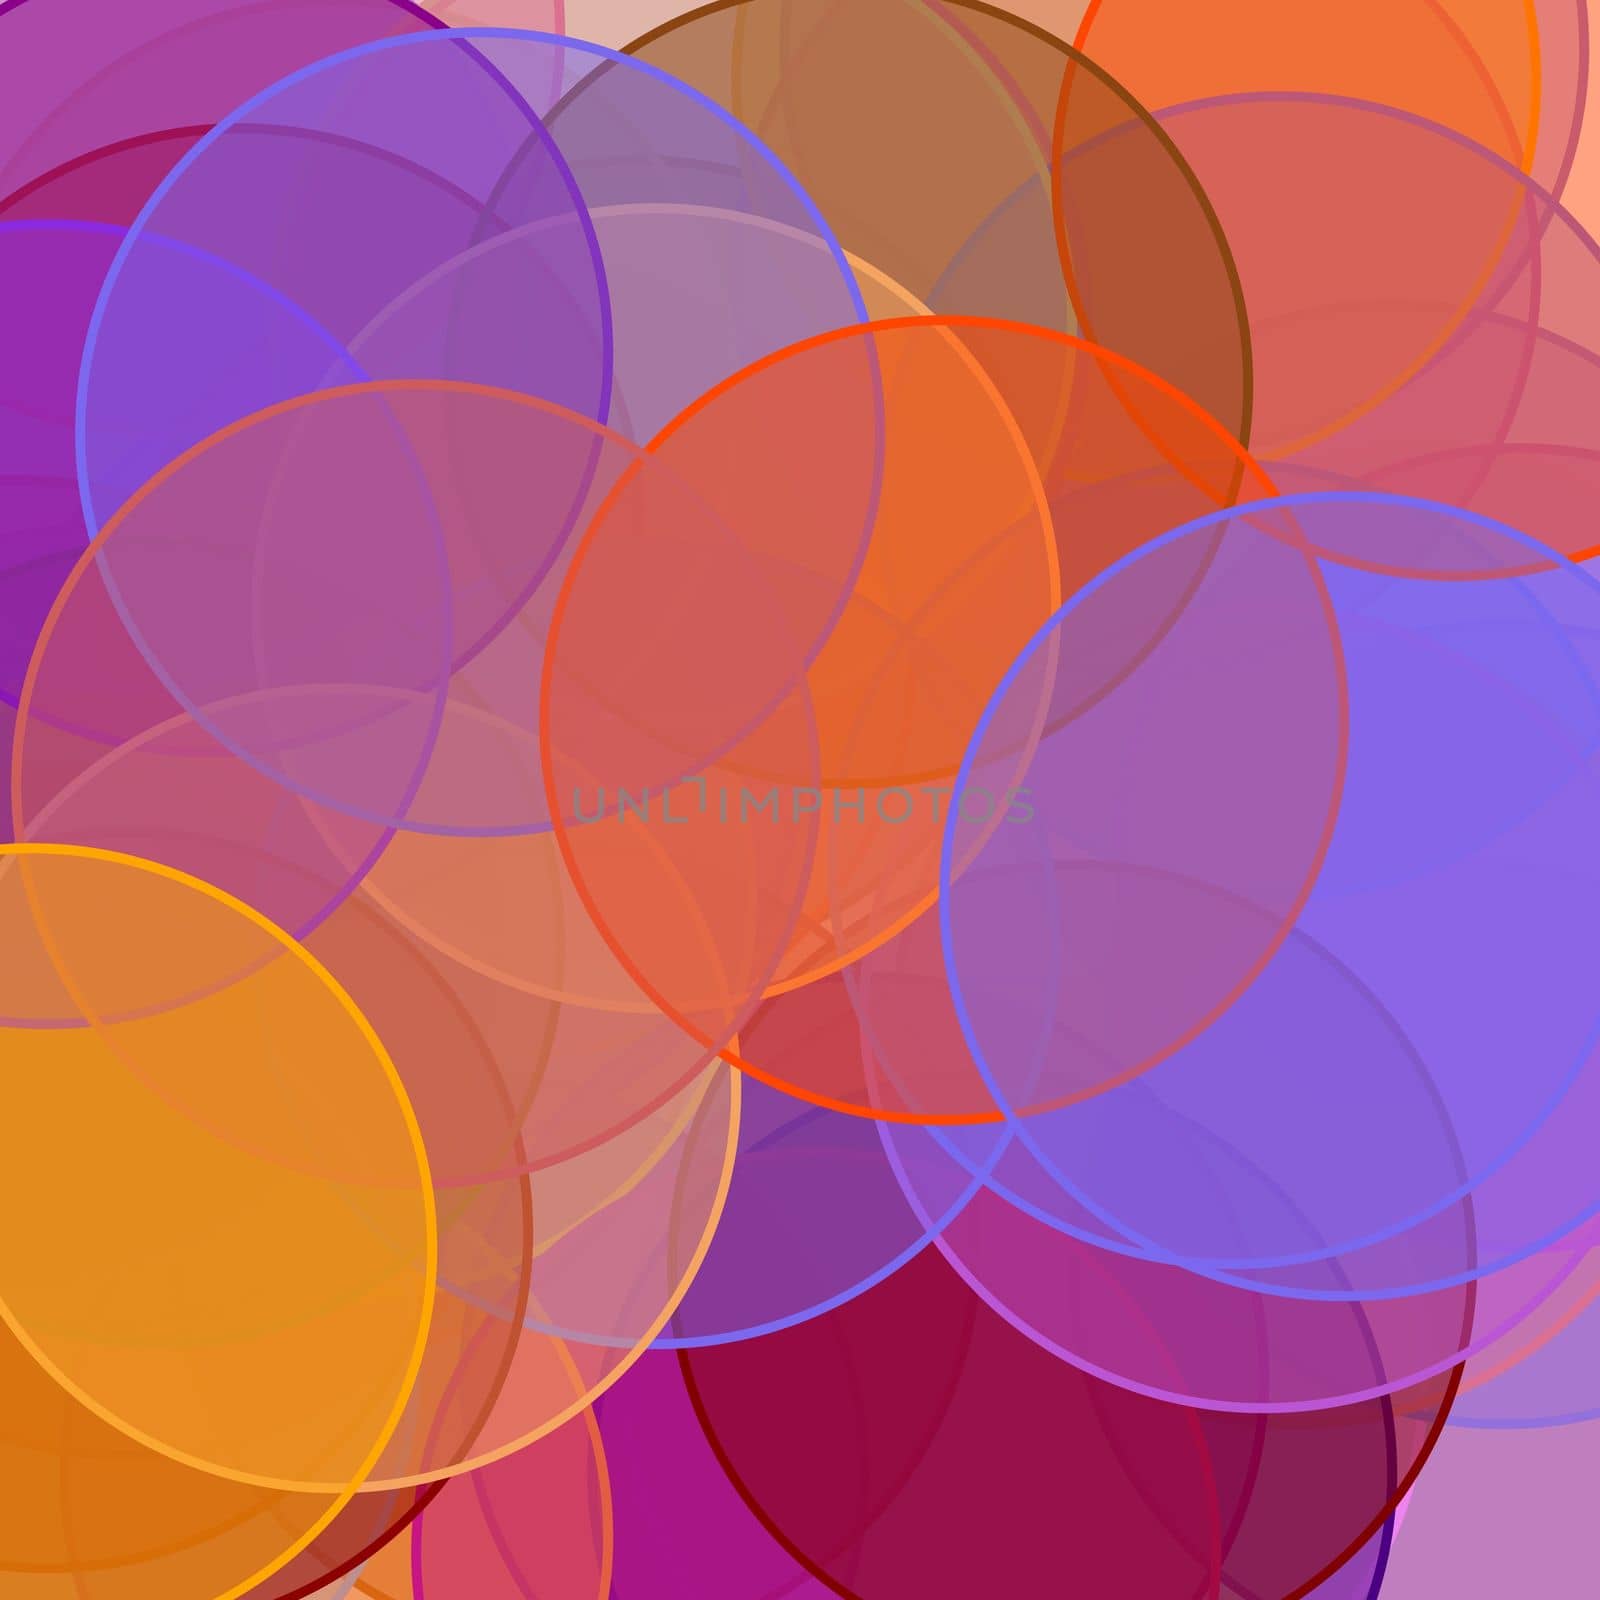 Abstract red orange brown violet circles illustration background by claudiodivizia